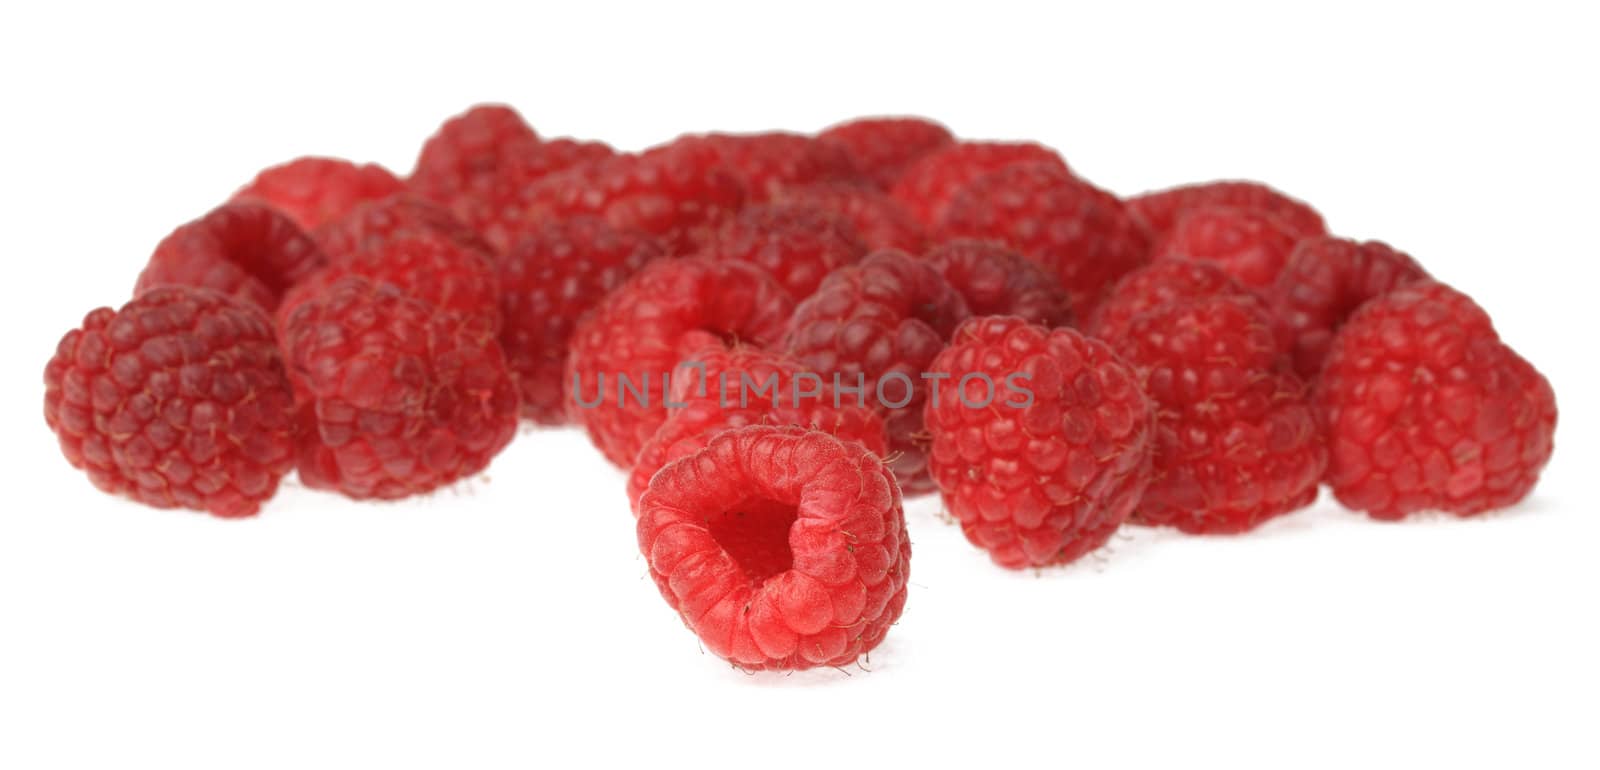 Raspberries against a white background.Selective focus on the closest fruit.